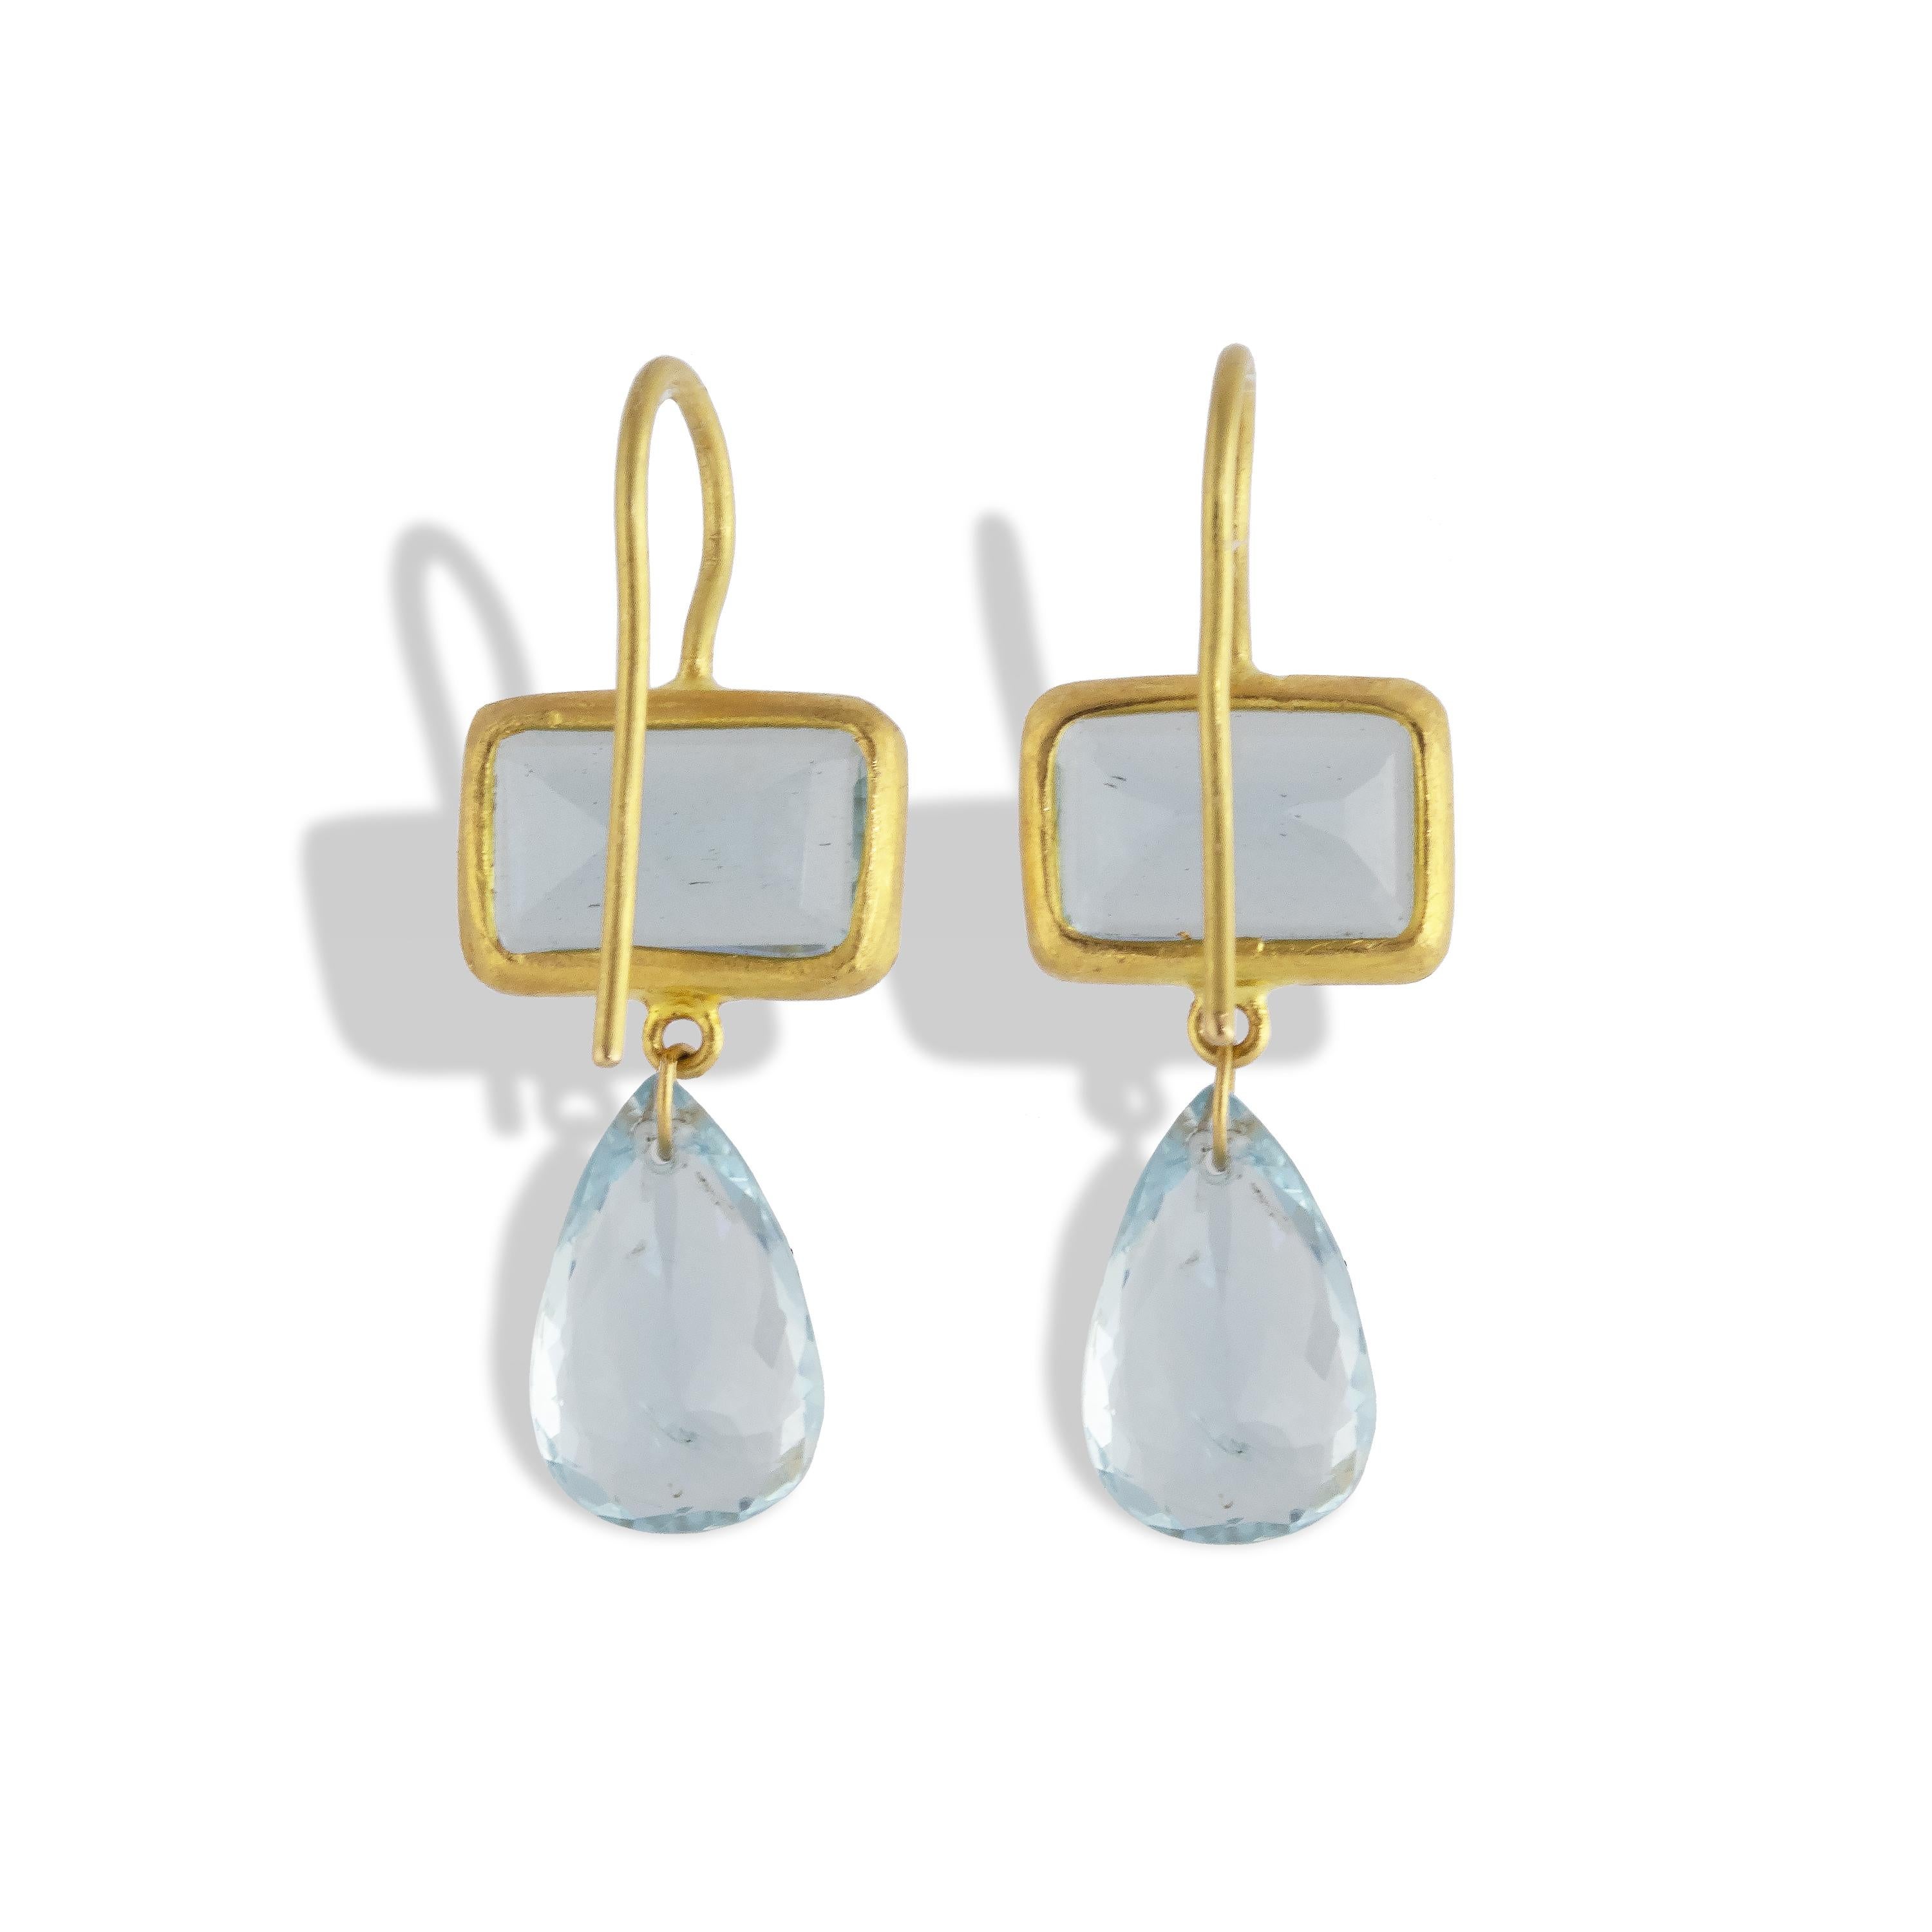 Ico & the Bird Fine Jewelry 9.2 carat Aquamarine  Gold Earrings In New Condition For Sale In Los Angeles, CA